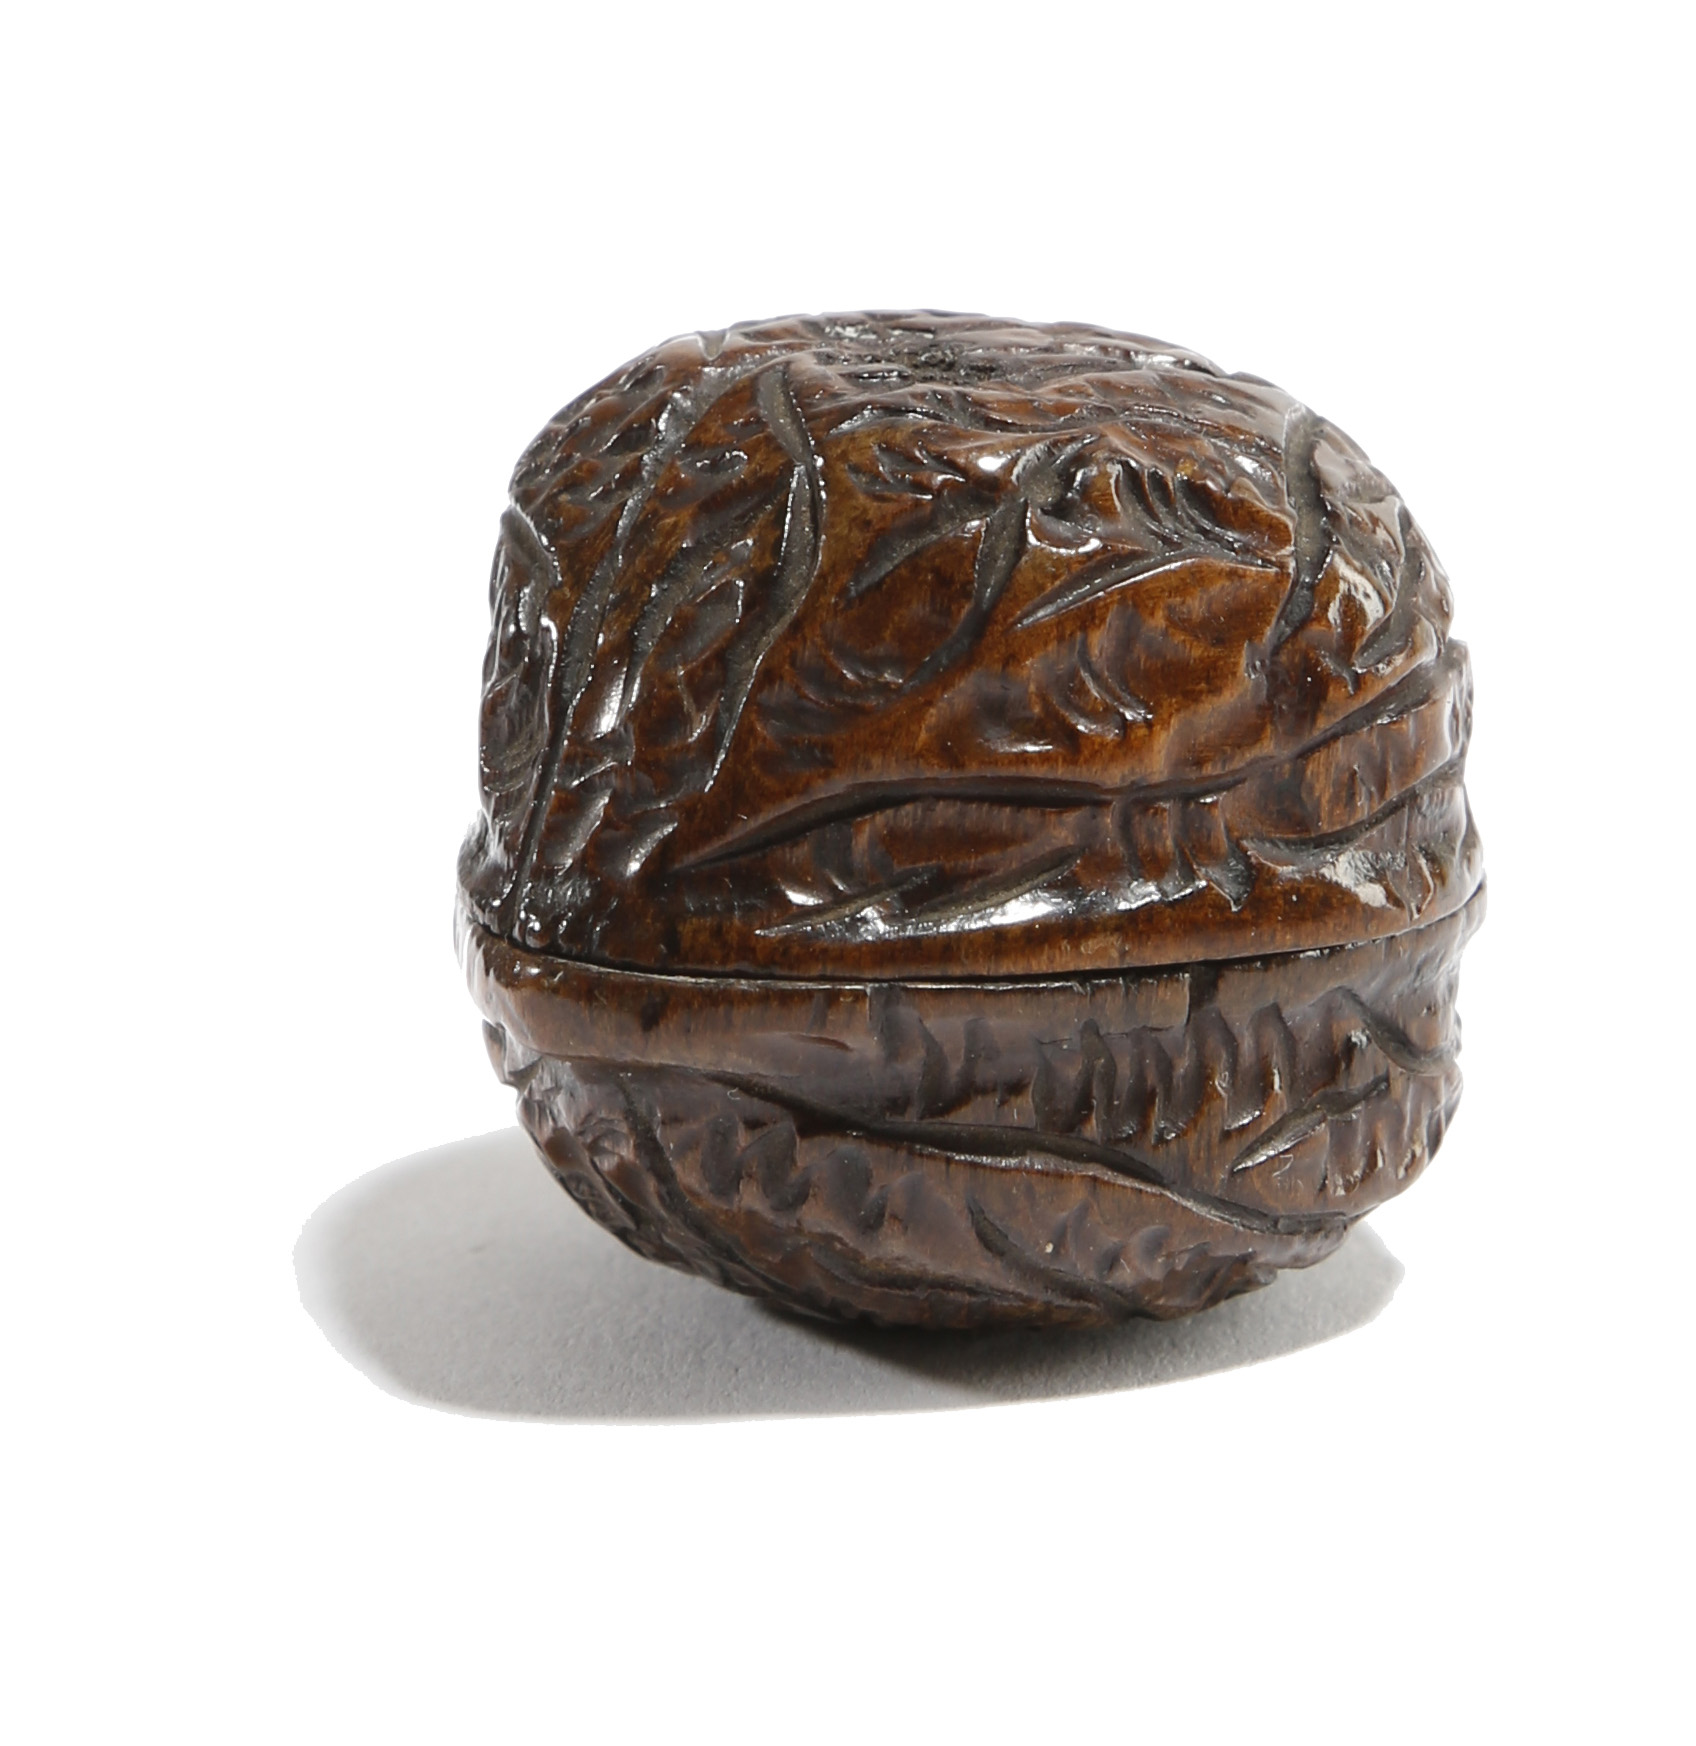 A TREEN SNUFF BOX CARVED IN THE FORM OF A WALNUT PROBABLY 19TH CENTURY 3.2cm wide PROVENANCE 'A